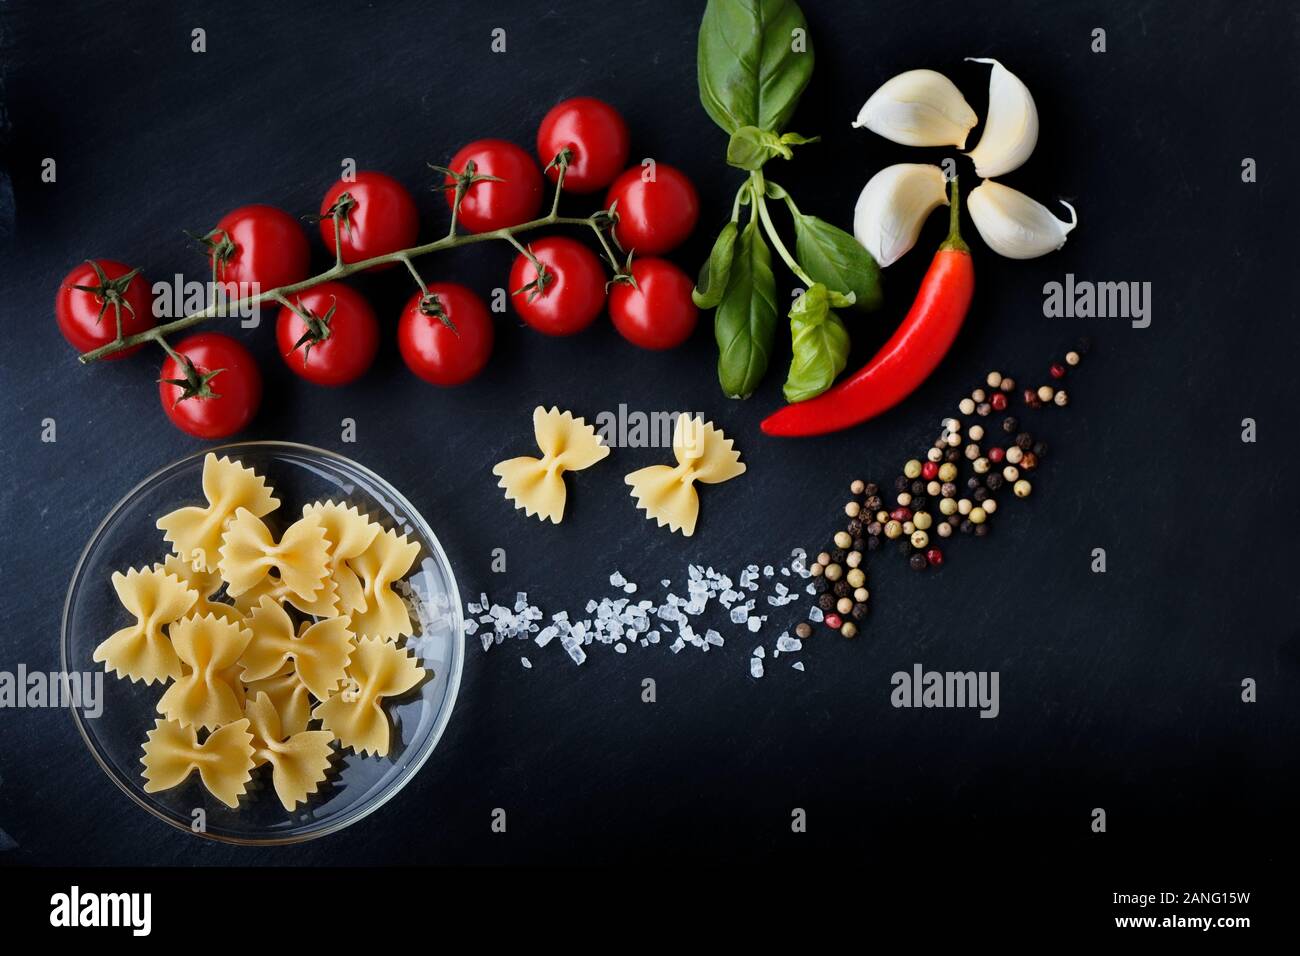 Pasta with vegetables ingredients on a black stone for an Italian pasta dish Stock Photo